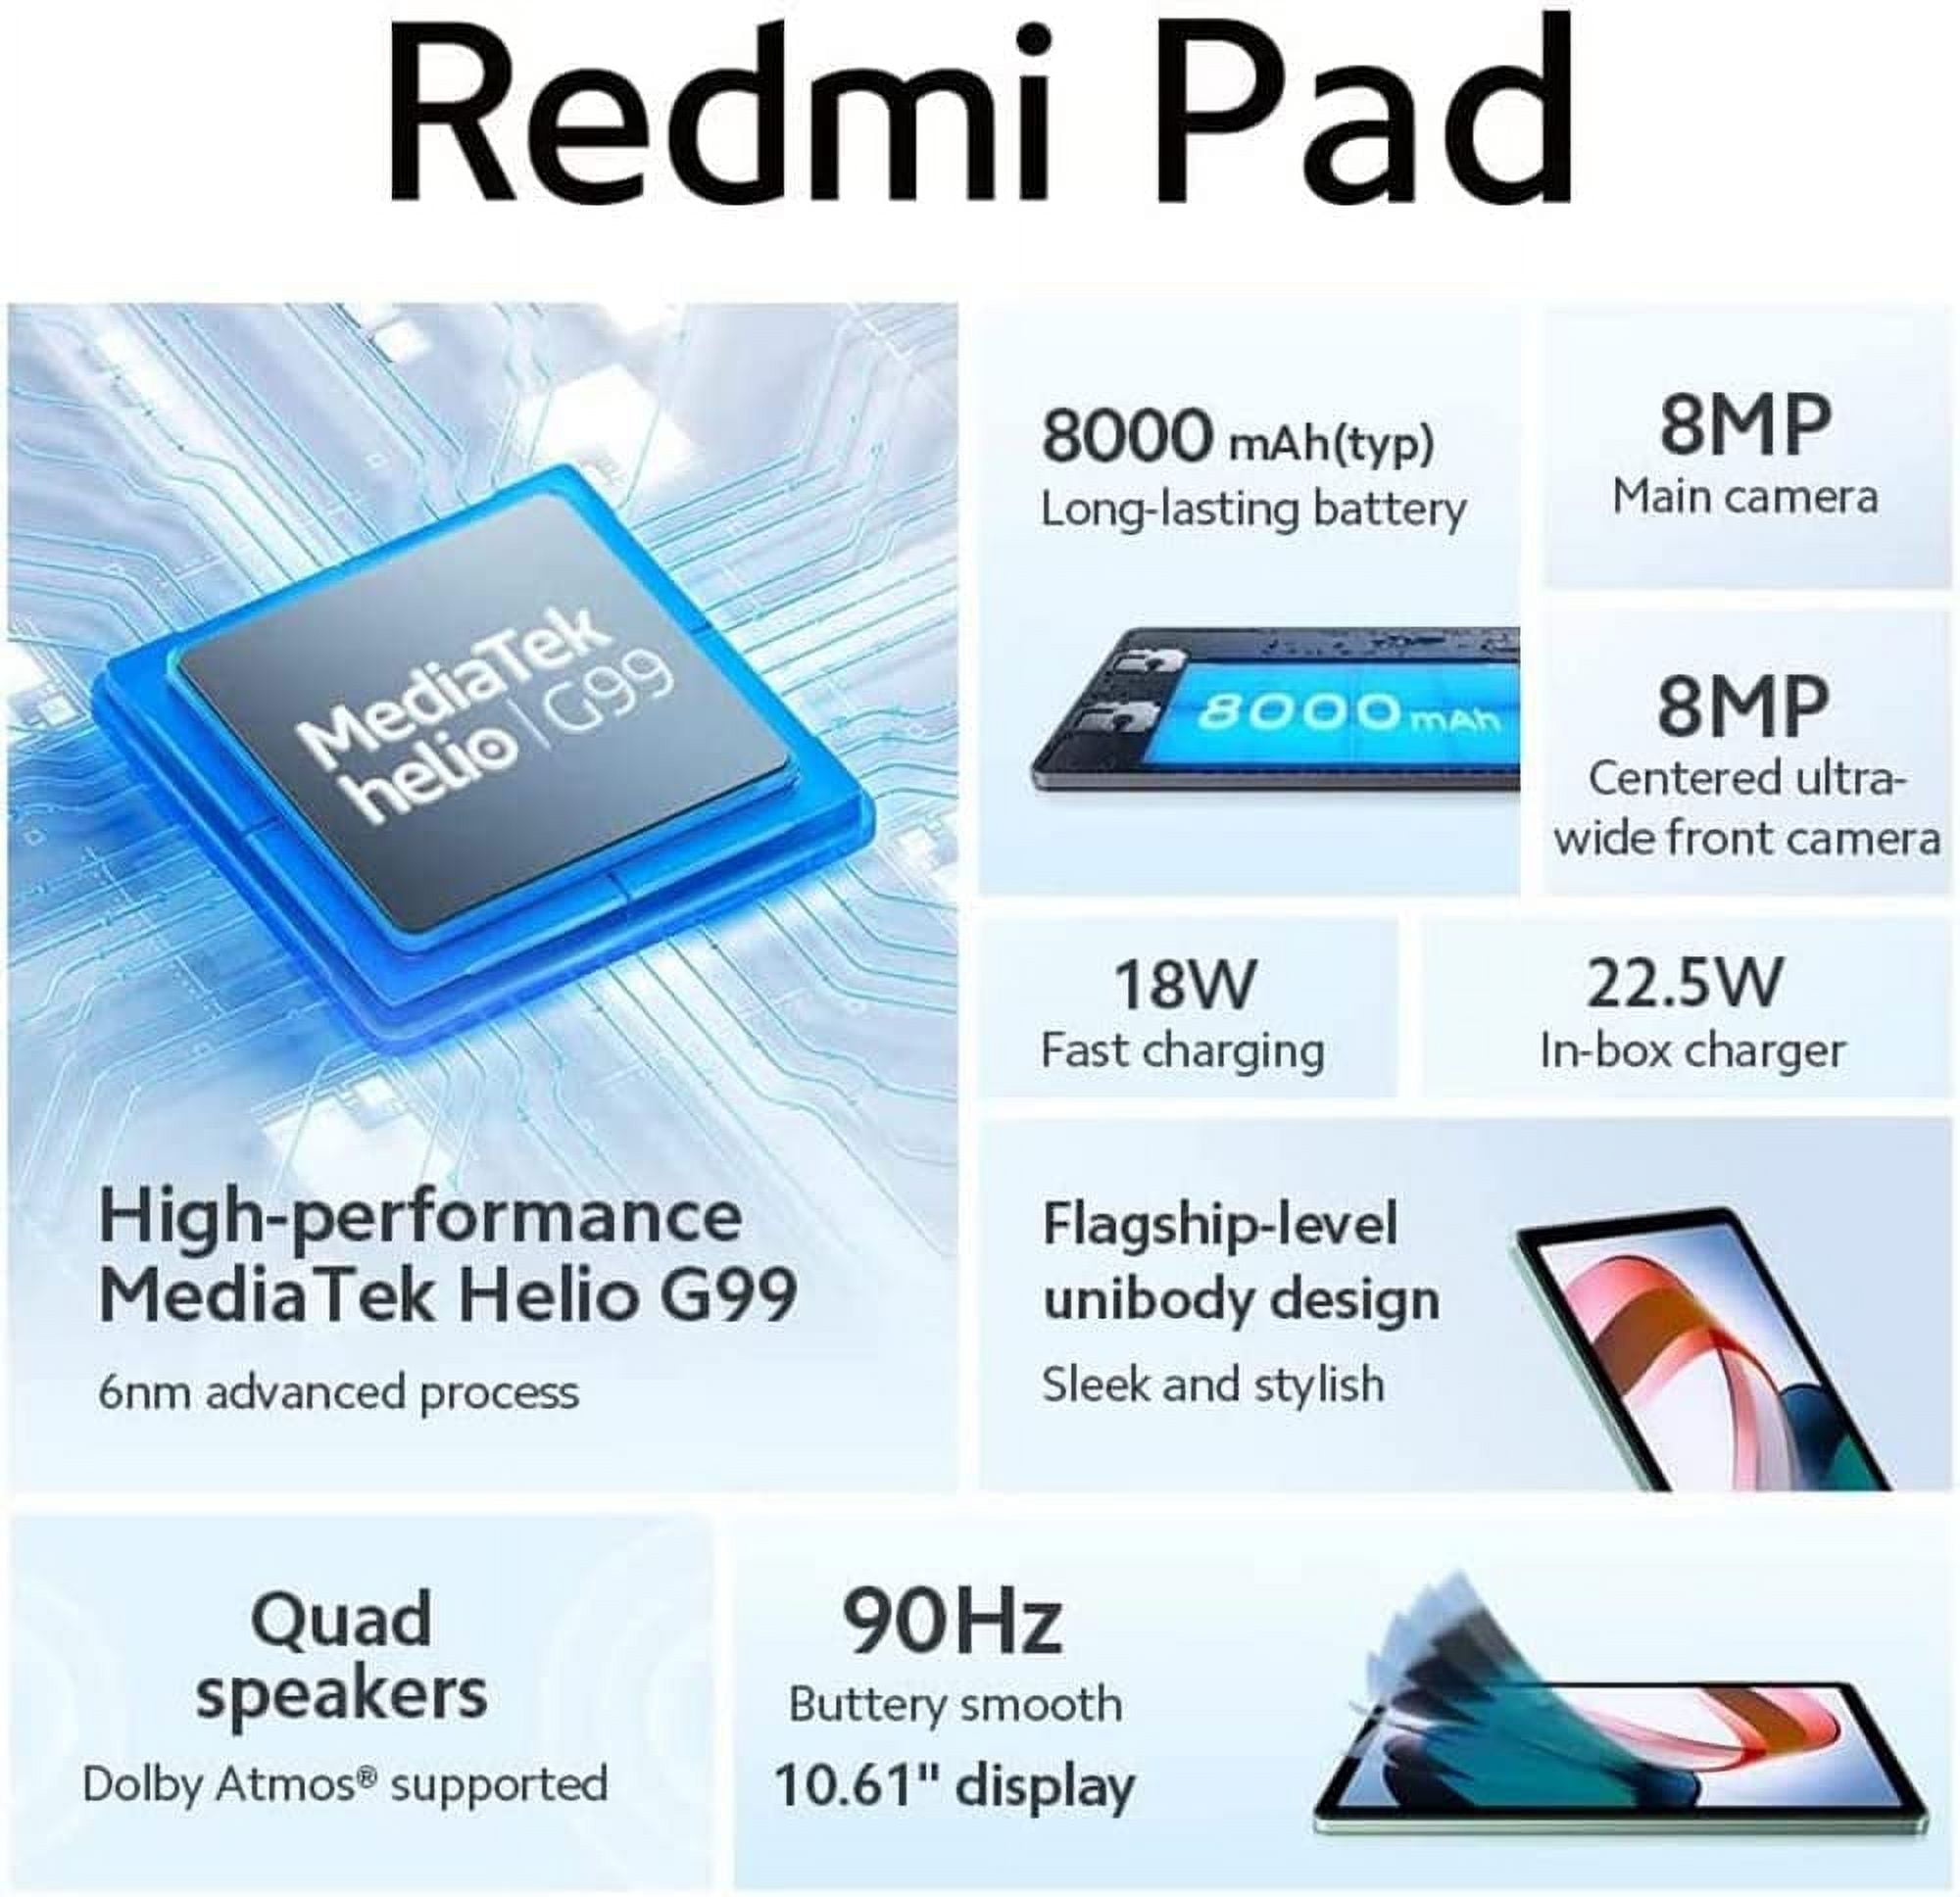 Xiaomi Redmi Pad Only WiFi 10.61 Octa Core Dolby Atmos 8000mAh Bluetooth  5.3 8MP + Fast Car Charger Bundle (Graphite Gray, 128GB + 4GB)